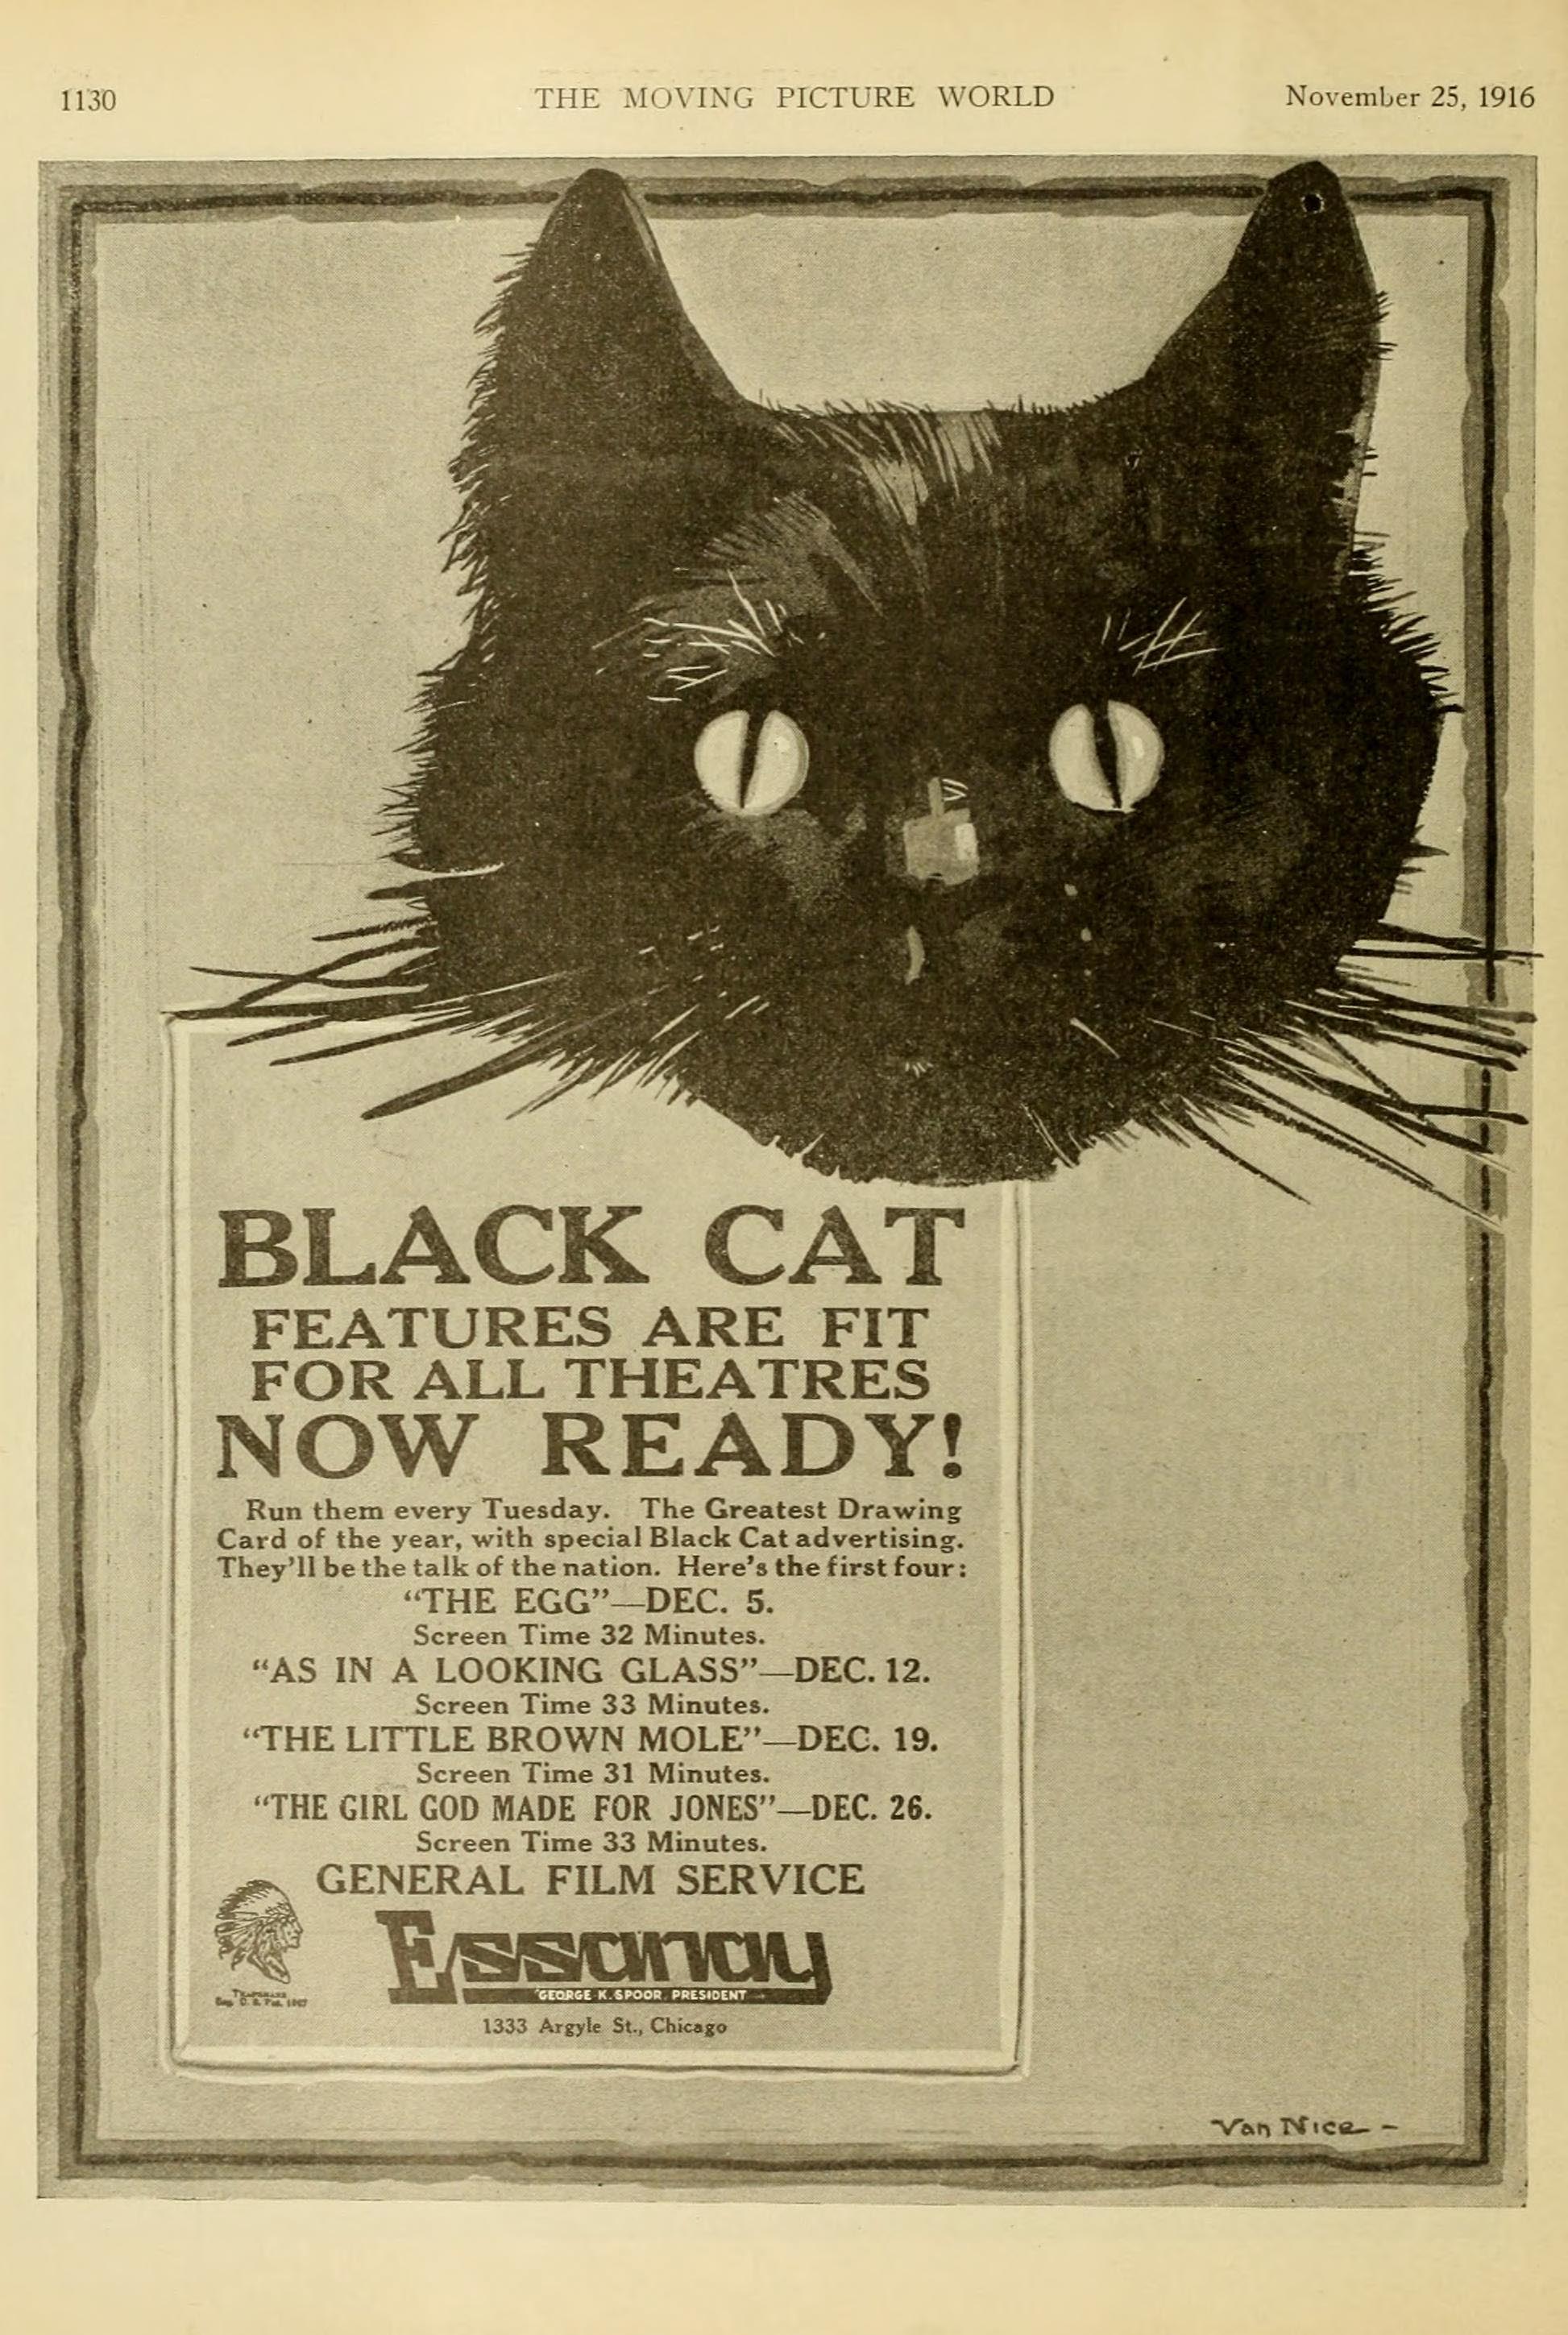 Advertisement for Black Cat General Film Services. The Moving Picture World, November 1916 